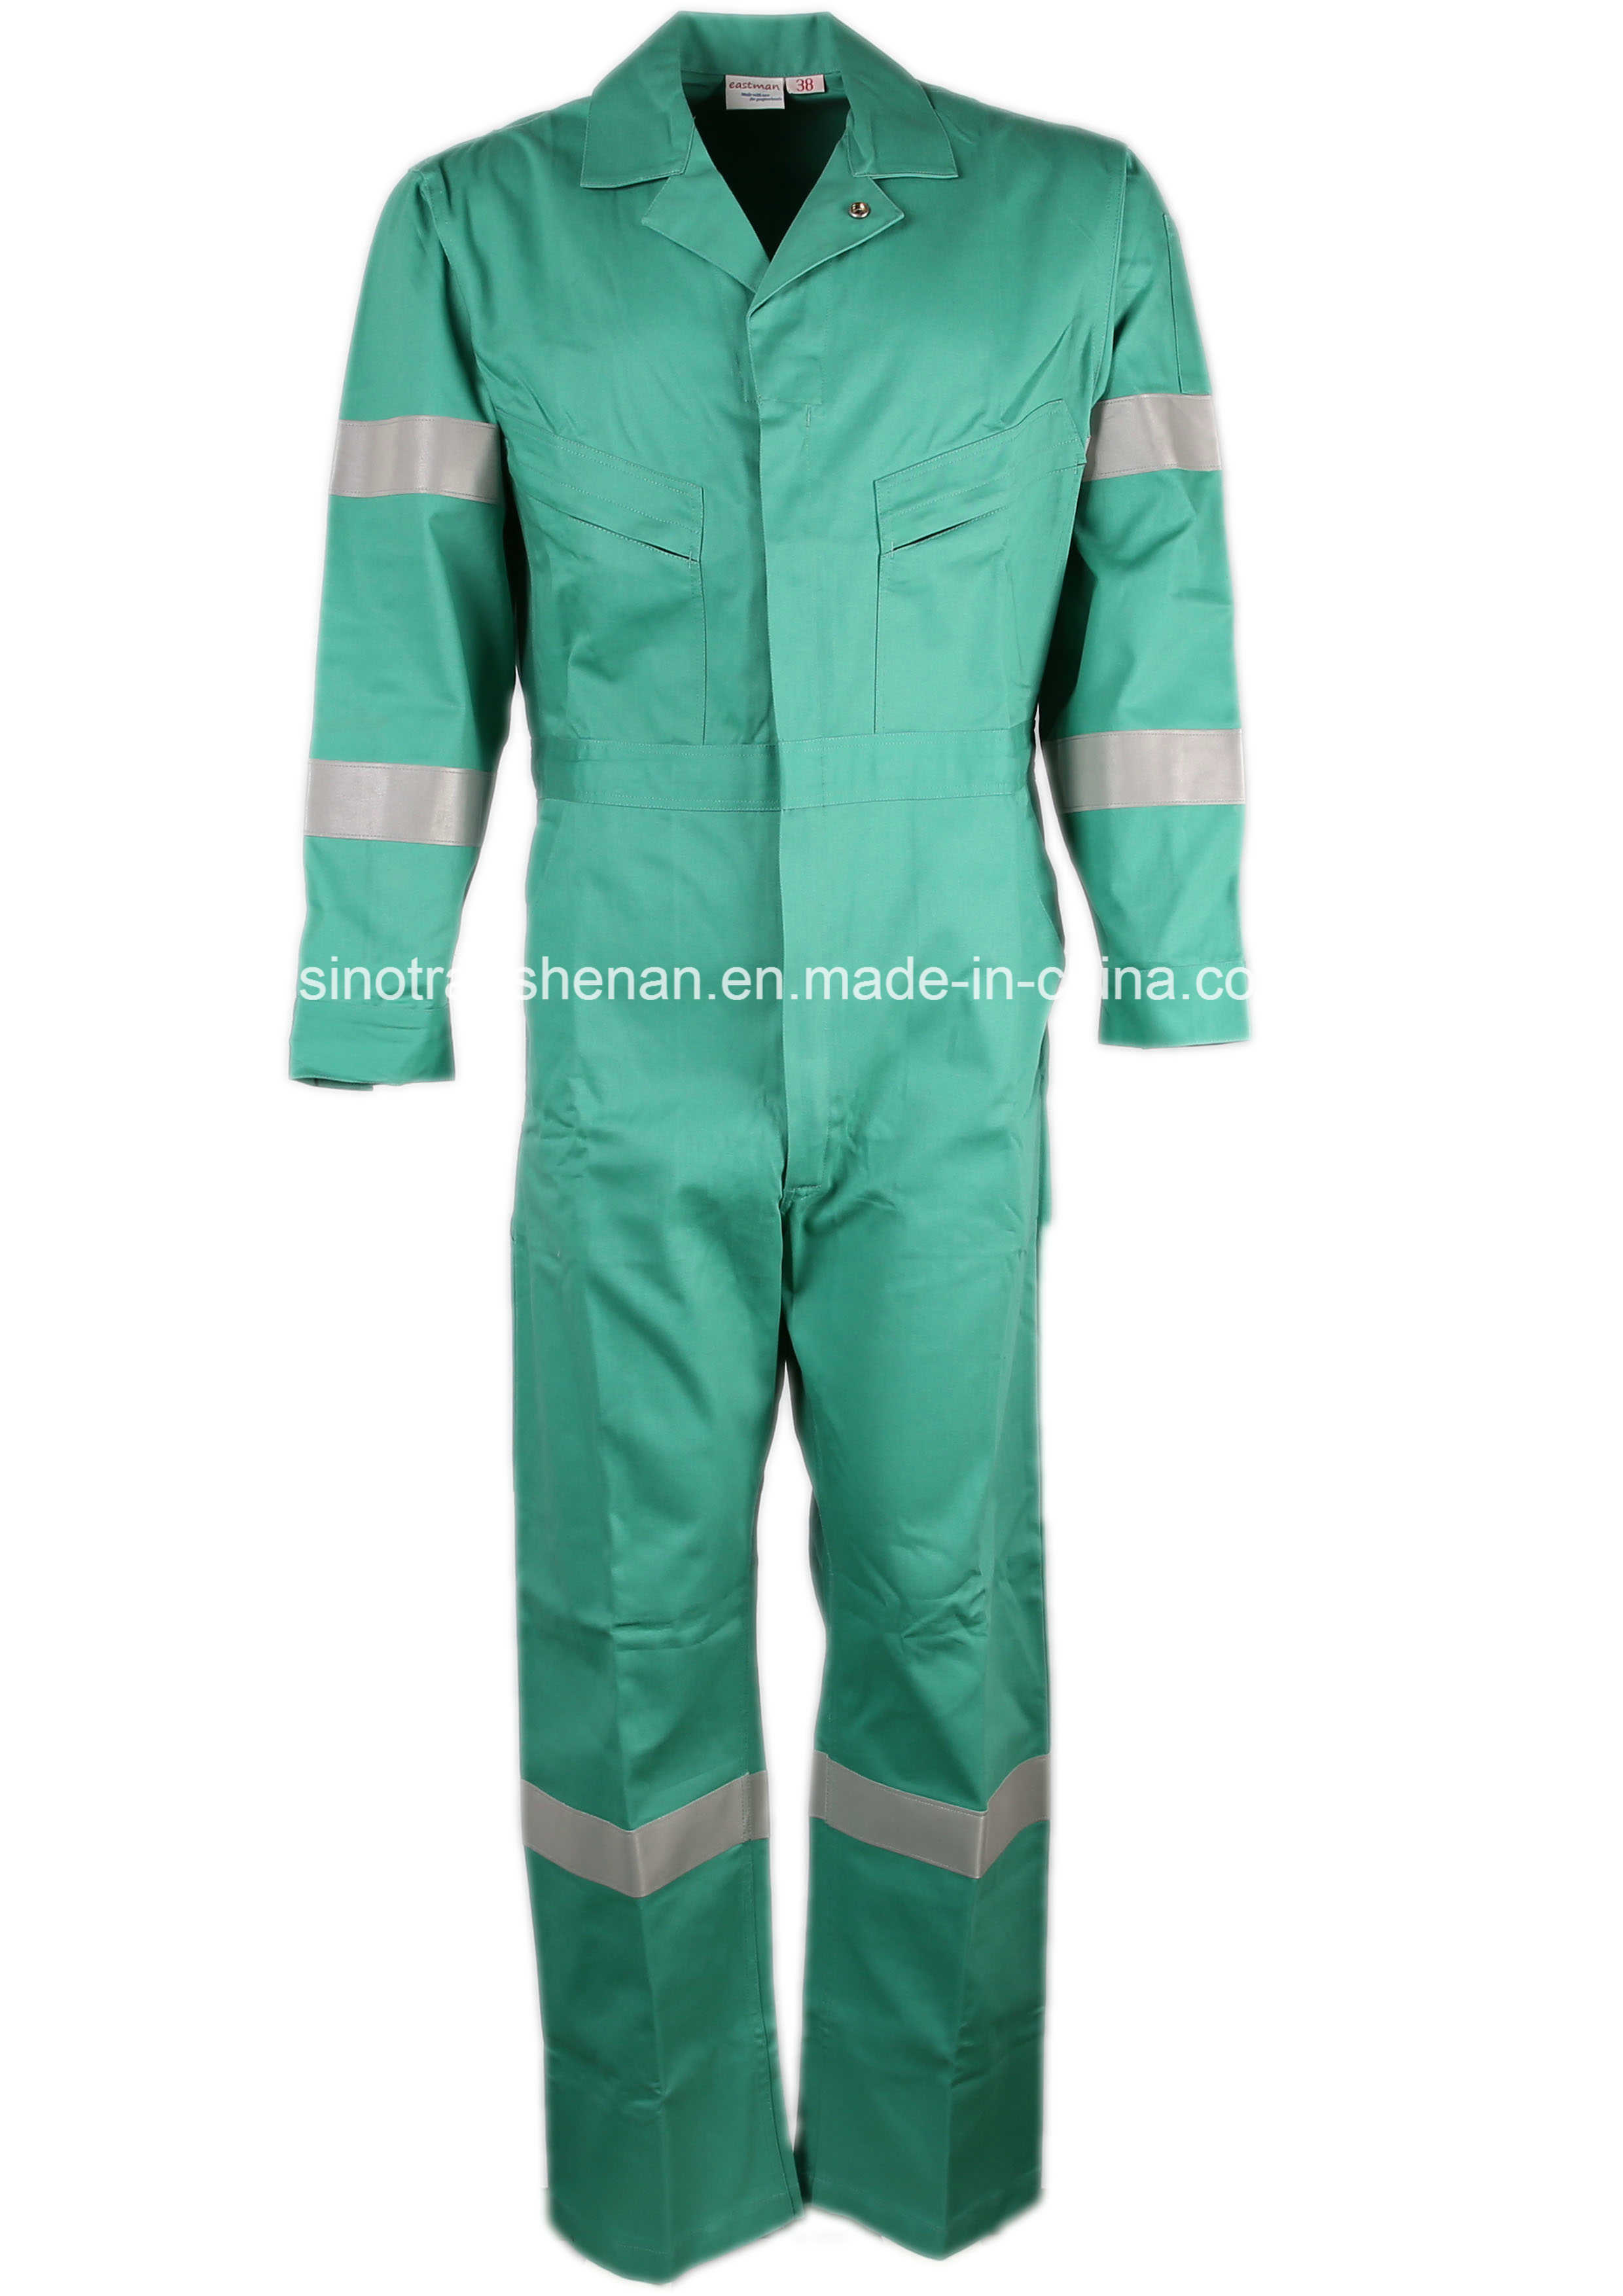 Used Fr Clothing Nfpa2112 Fire Retardant Coverall